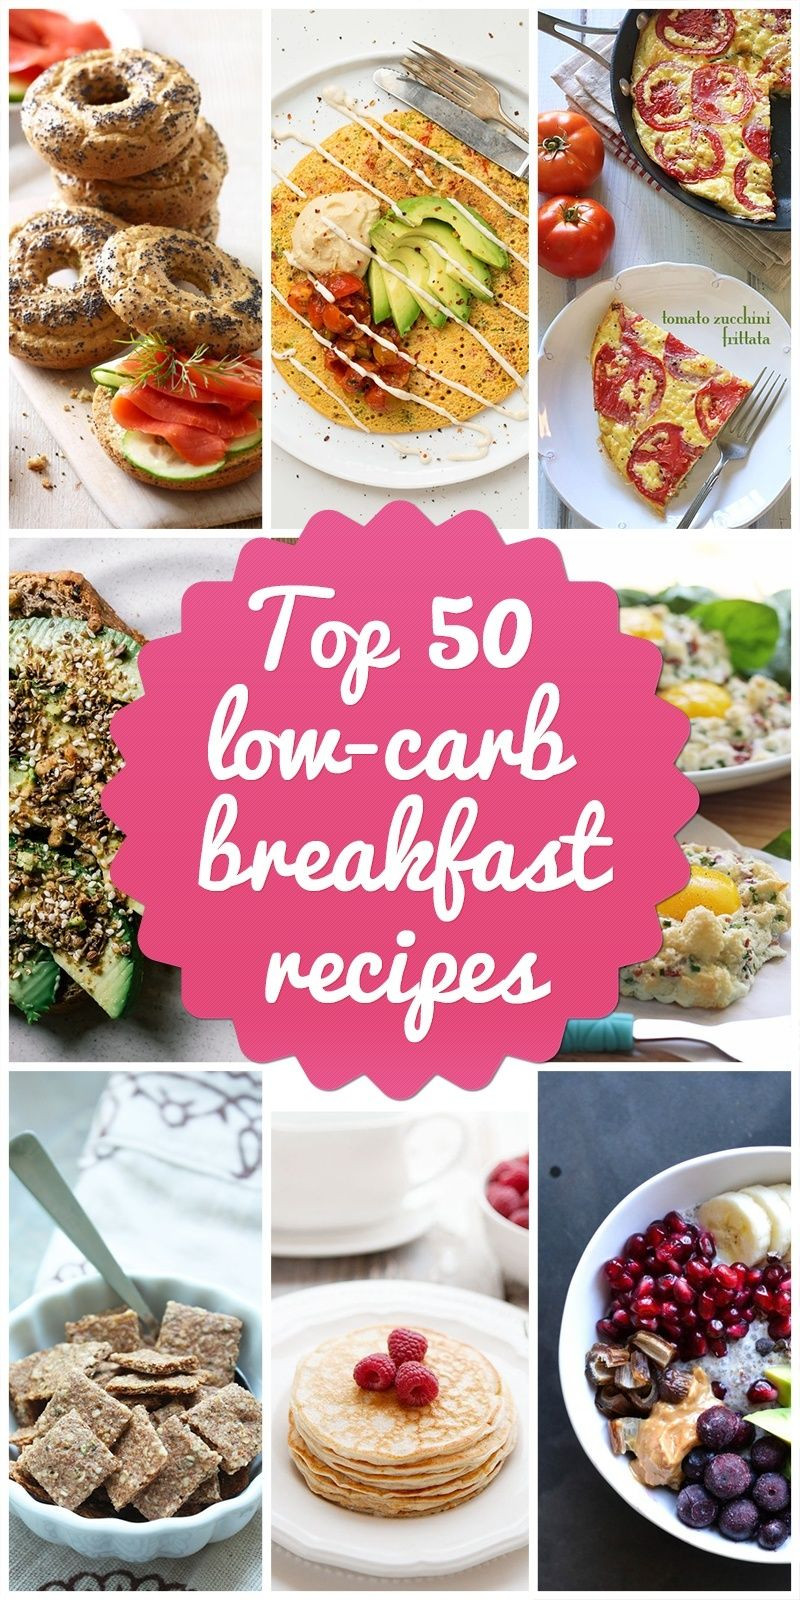 Low Carb Brunch Recipes
 Top 50 Low Carb Breakfast Recipes to Start Your Day